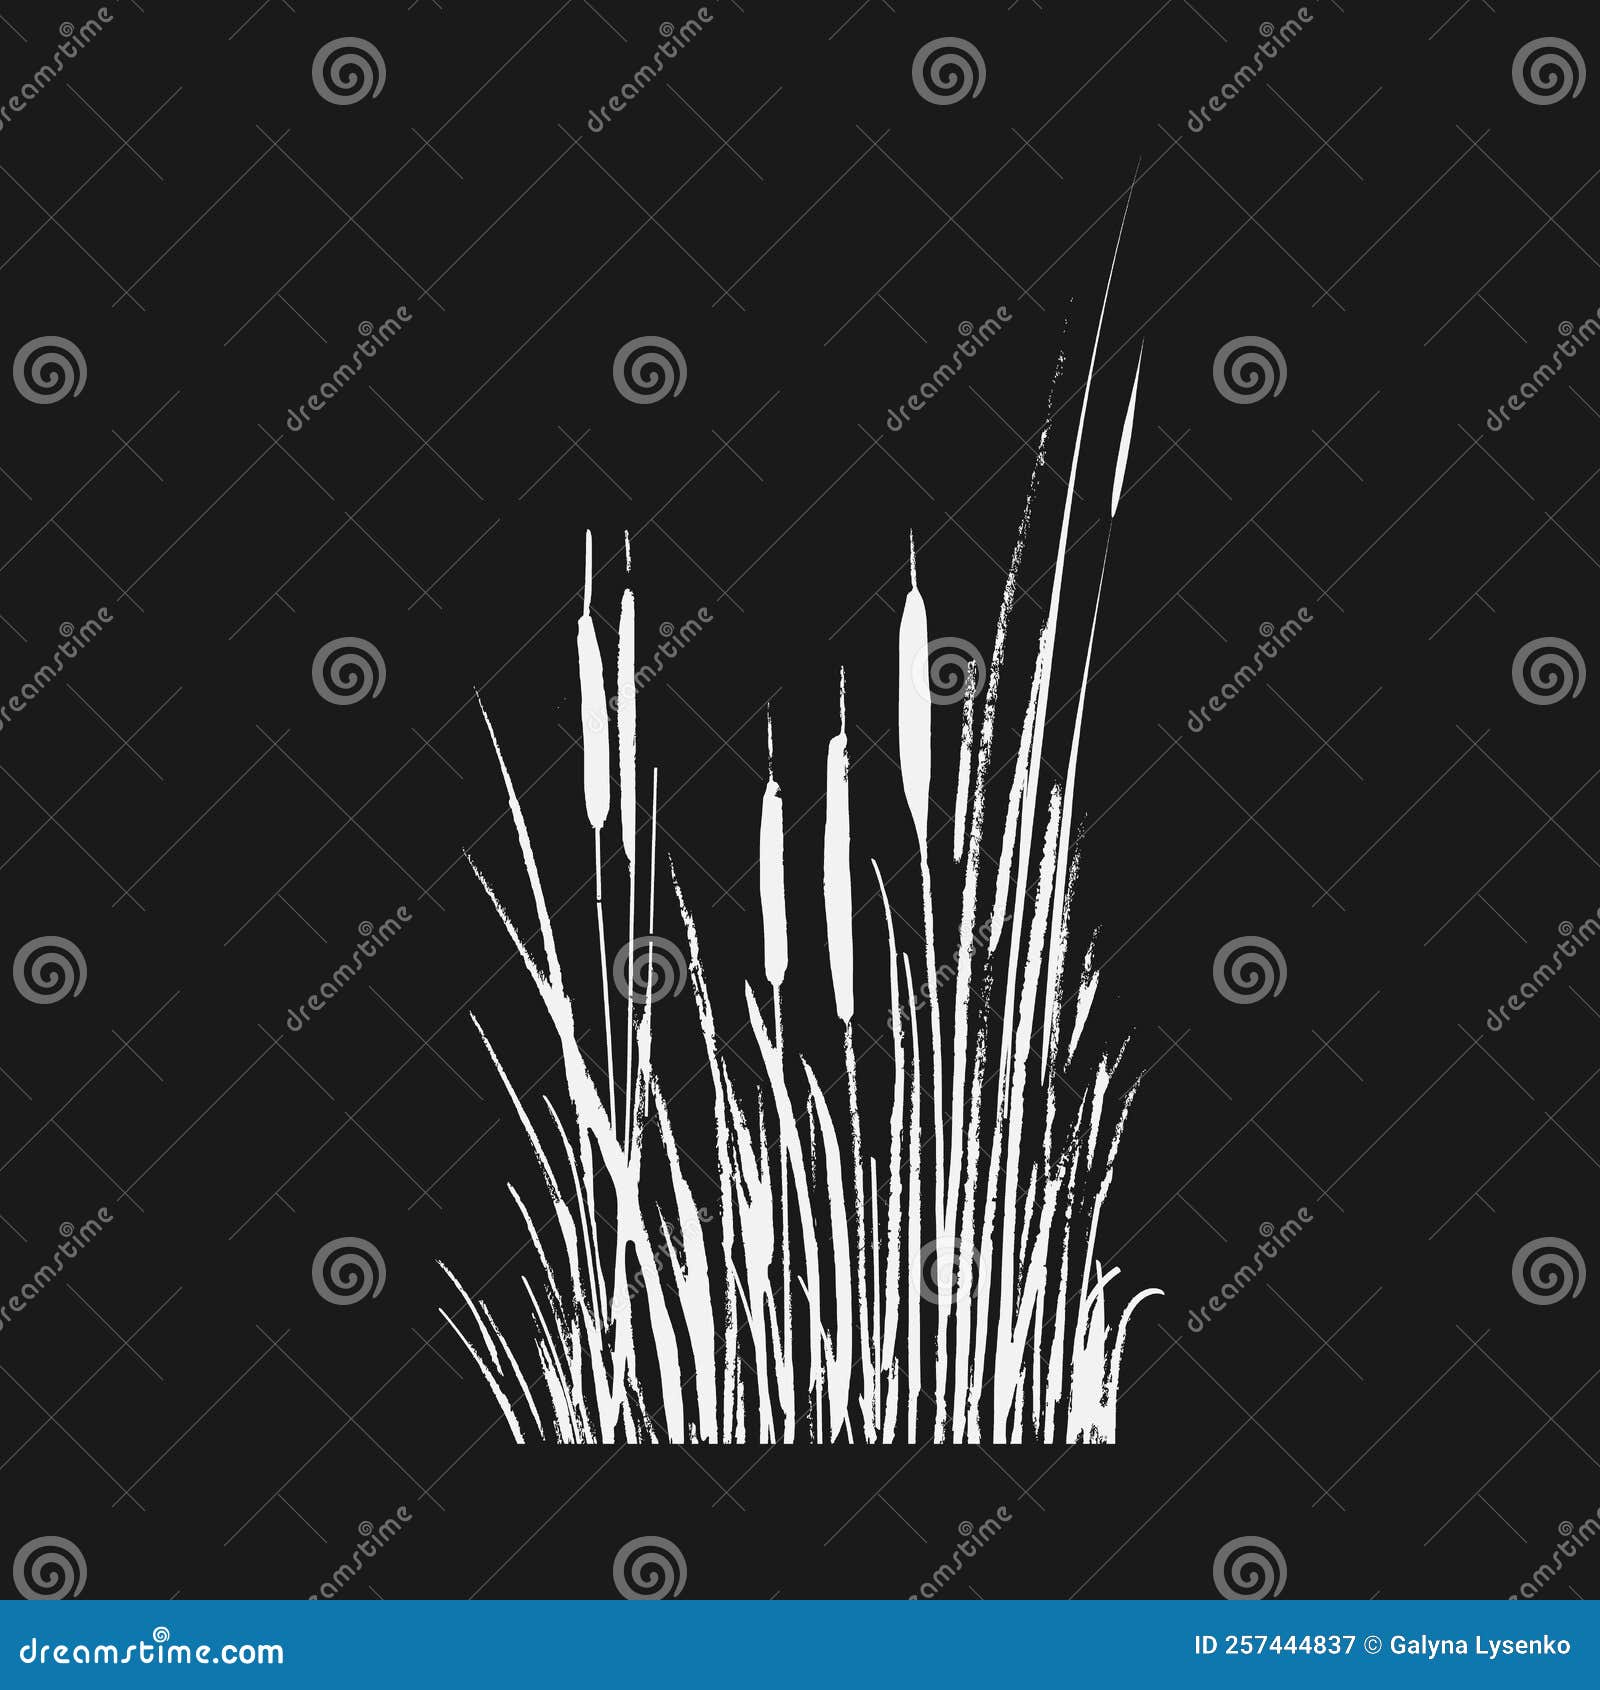 Image of a White Reed or Bulrush on a Black Background.Isolated Vector ...